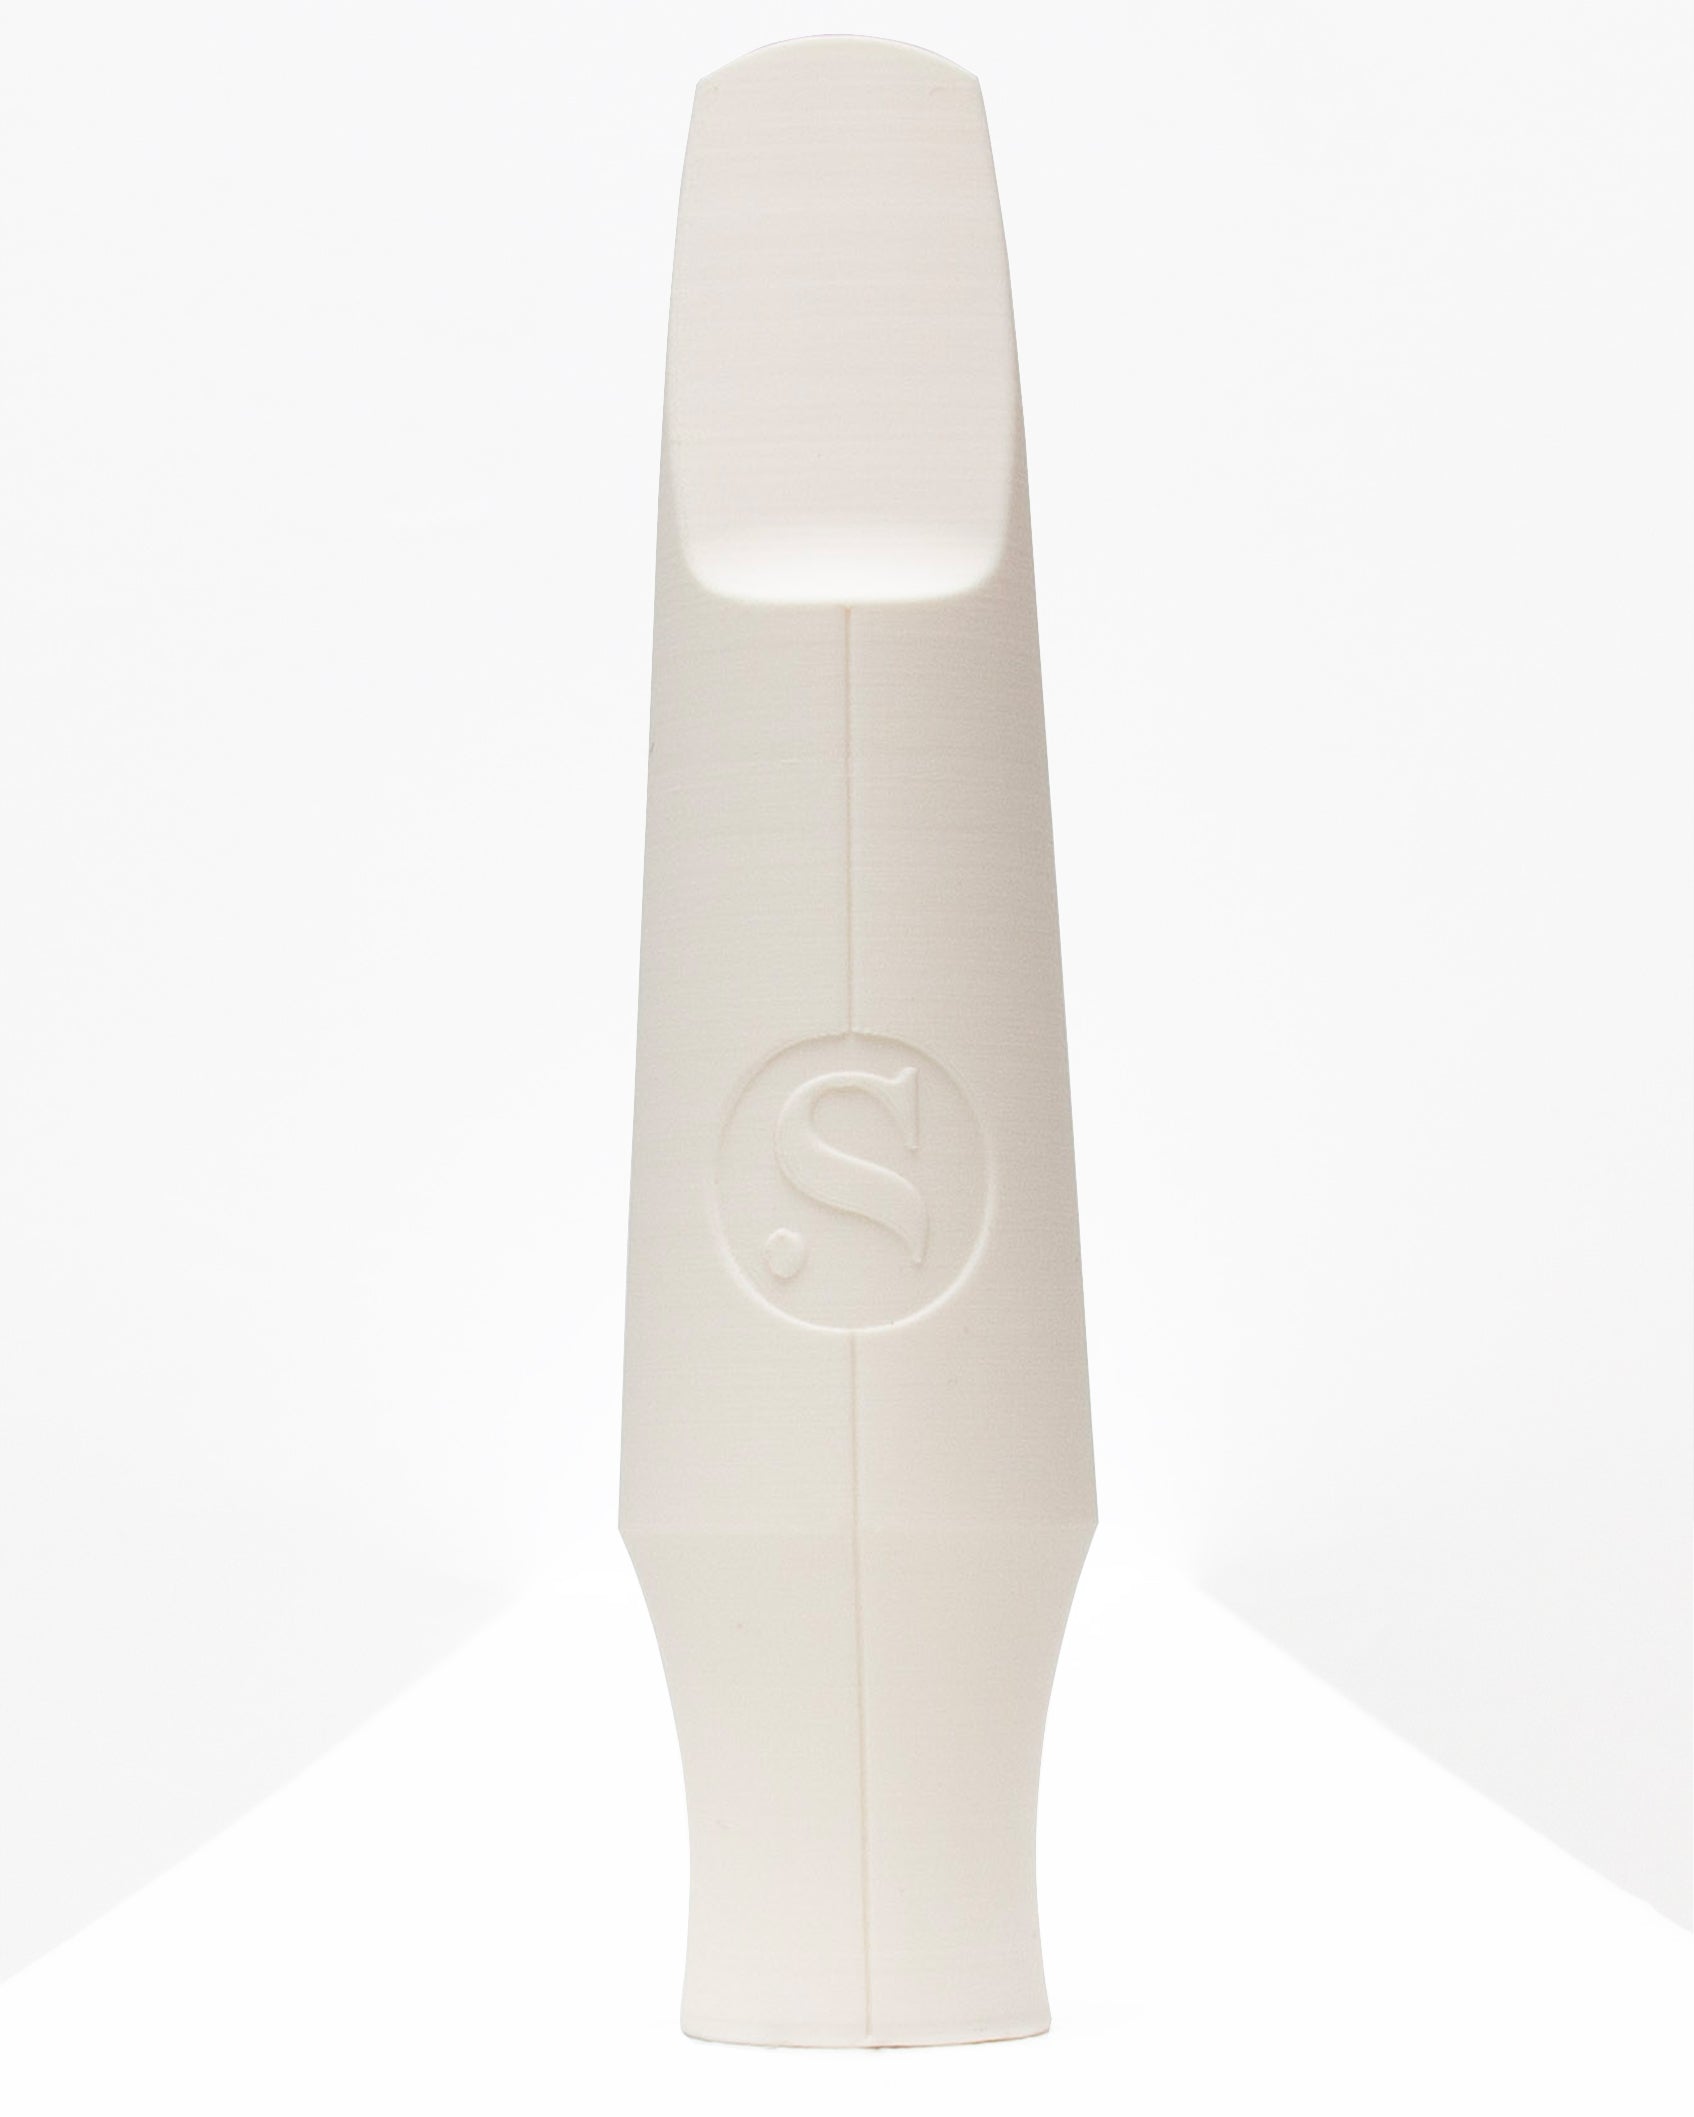 Baritone Originals Saxophone mouthpiece - Steady by Syos - 8 / Arctic White